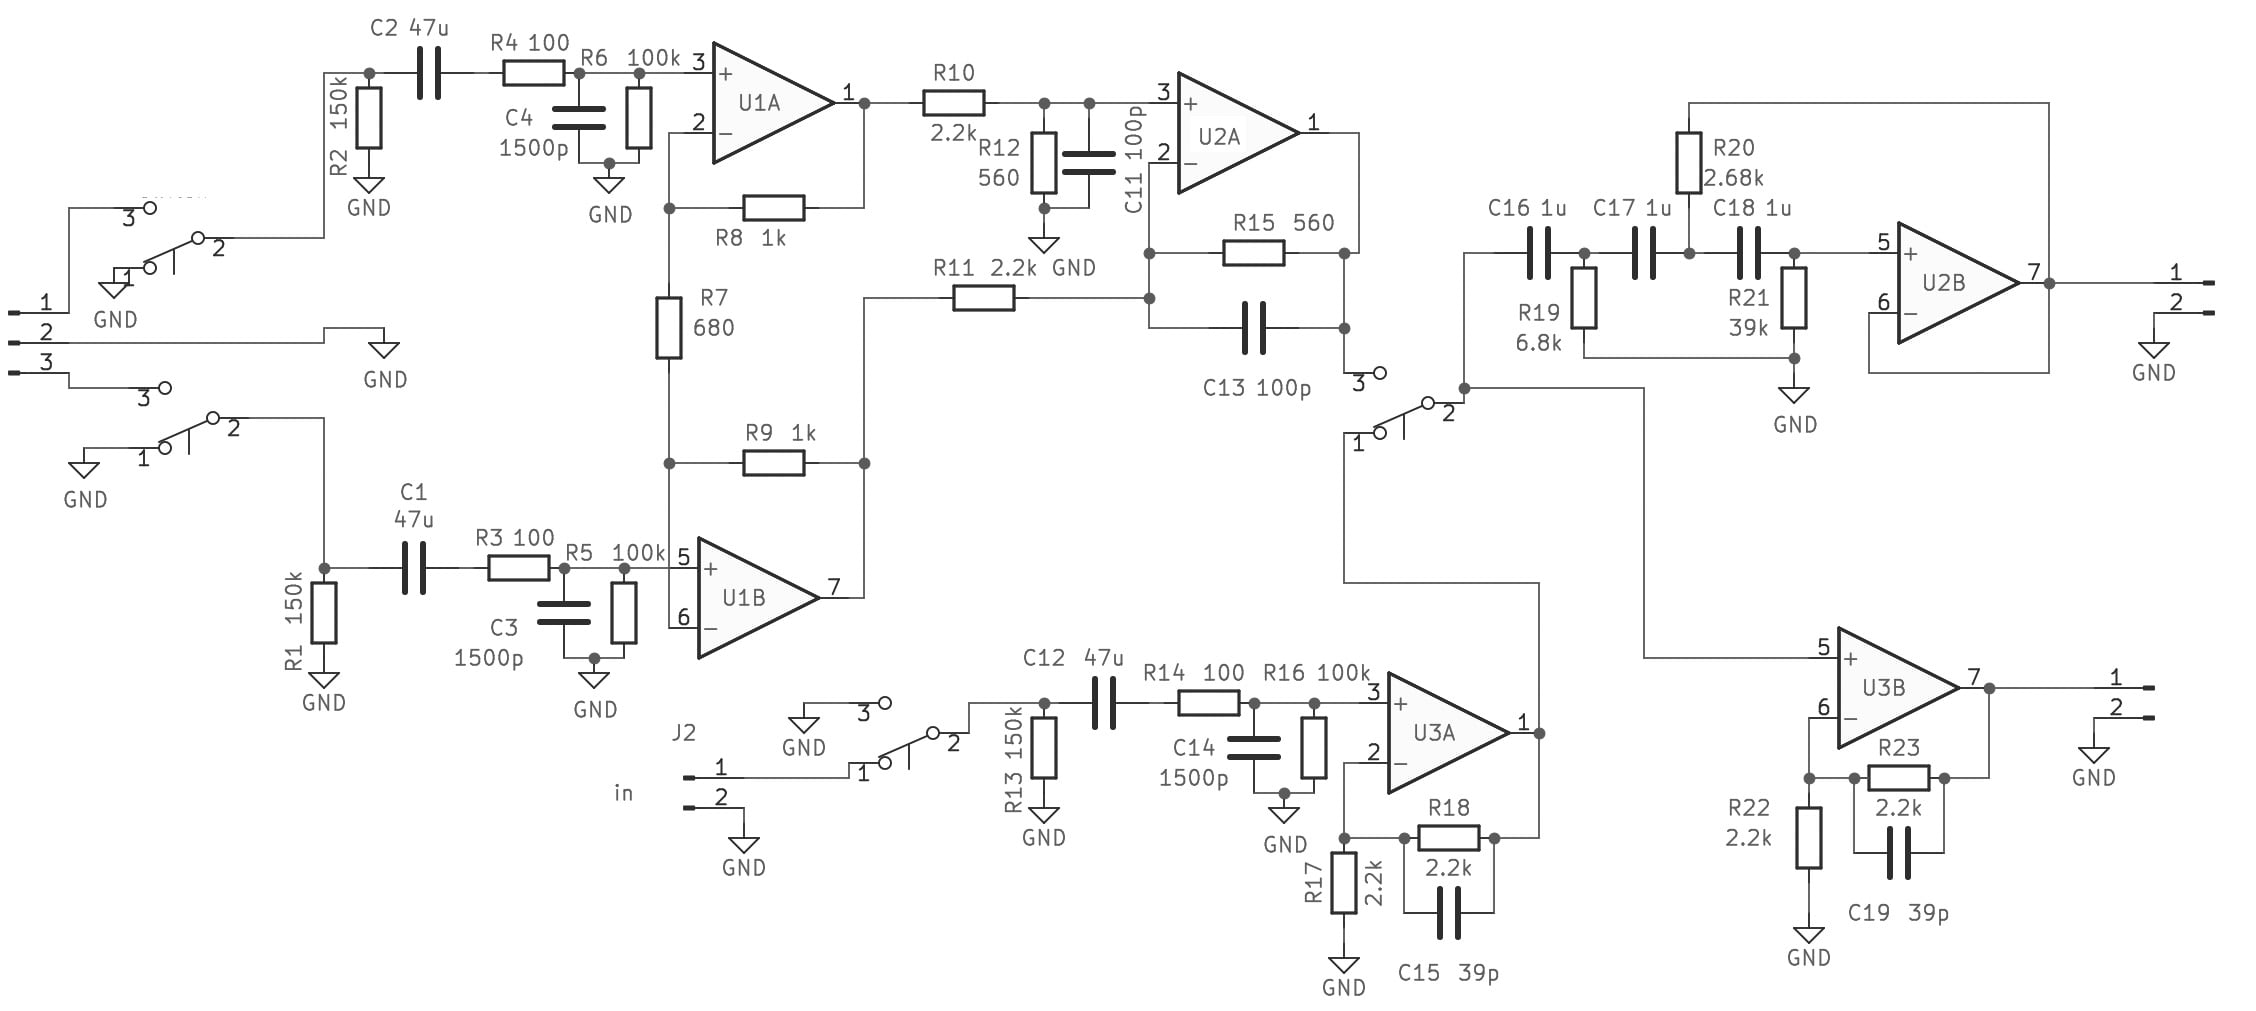 Ultra-low noise and distortion preamplifier with balanced and unbalanced inputs